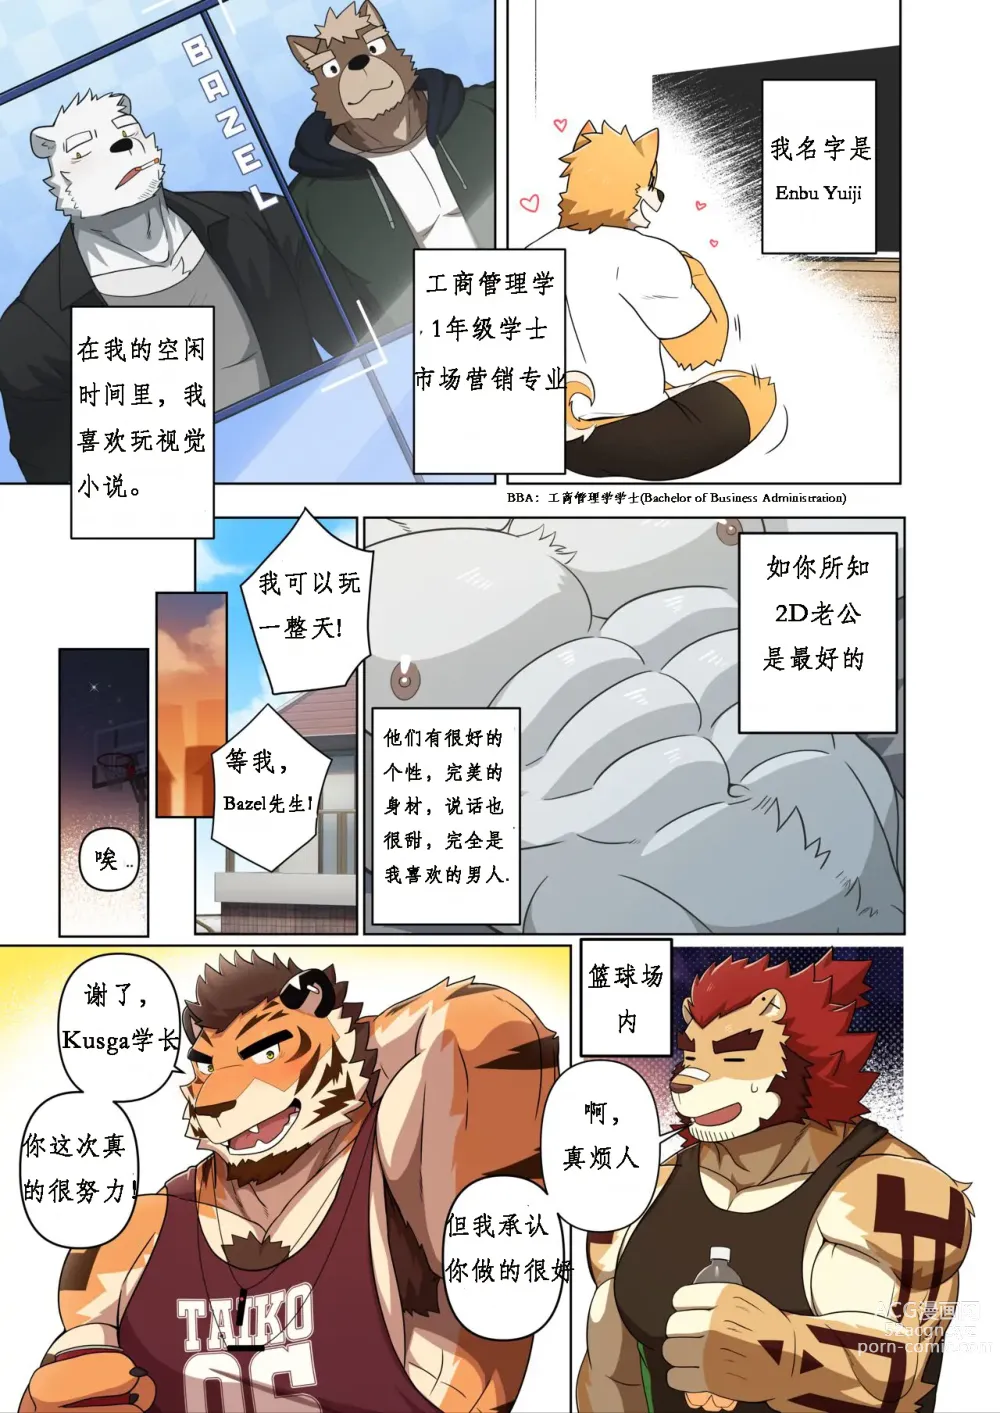 Page 6 of doujinshi 甜蜜陷阱 [Chinese］(Ongoing)【工口译制】